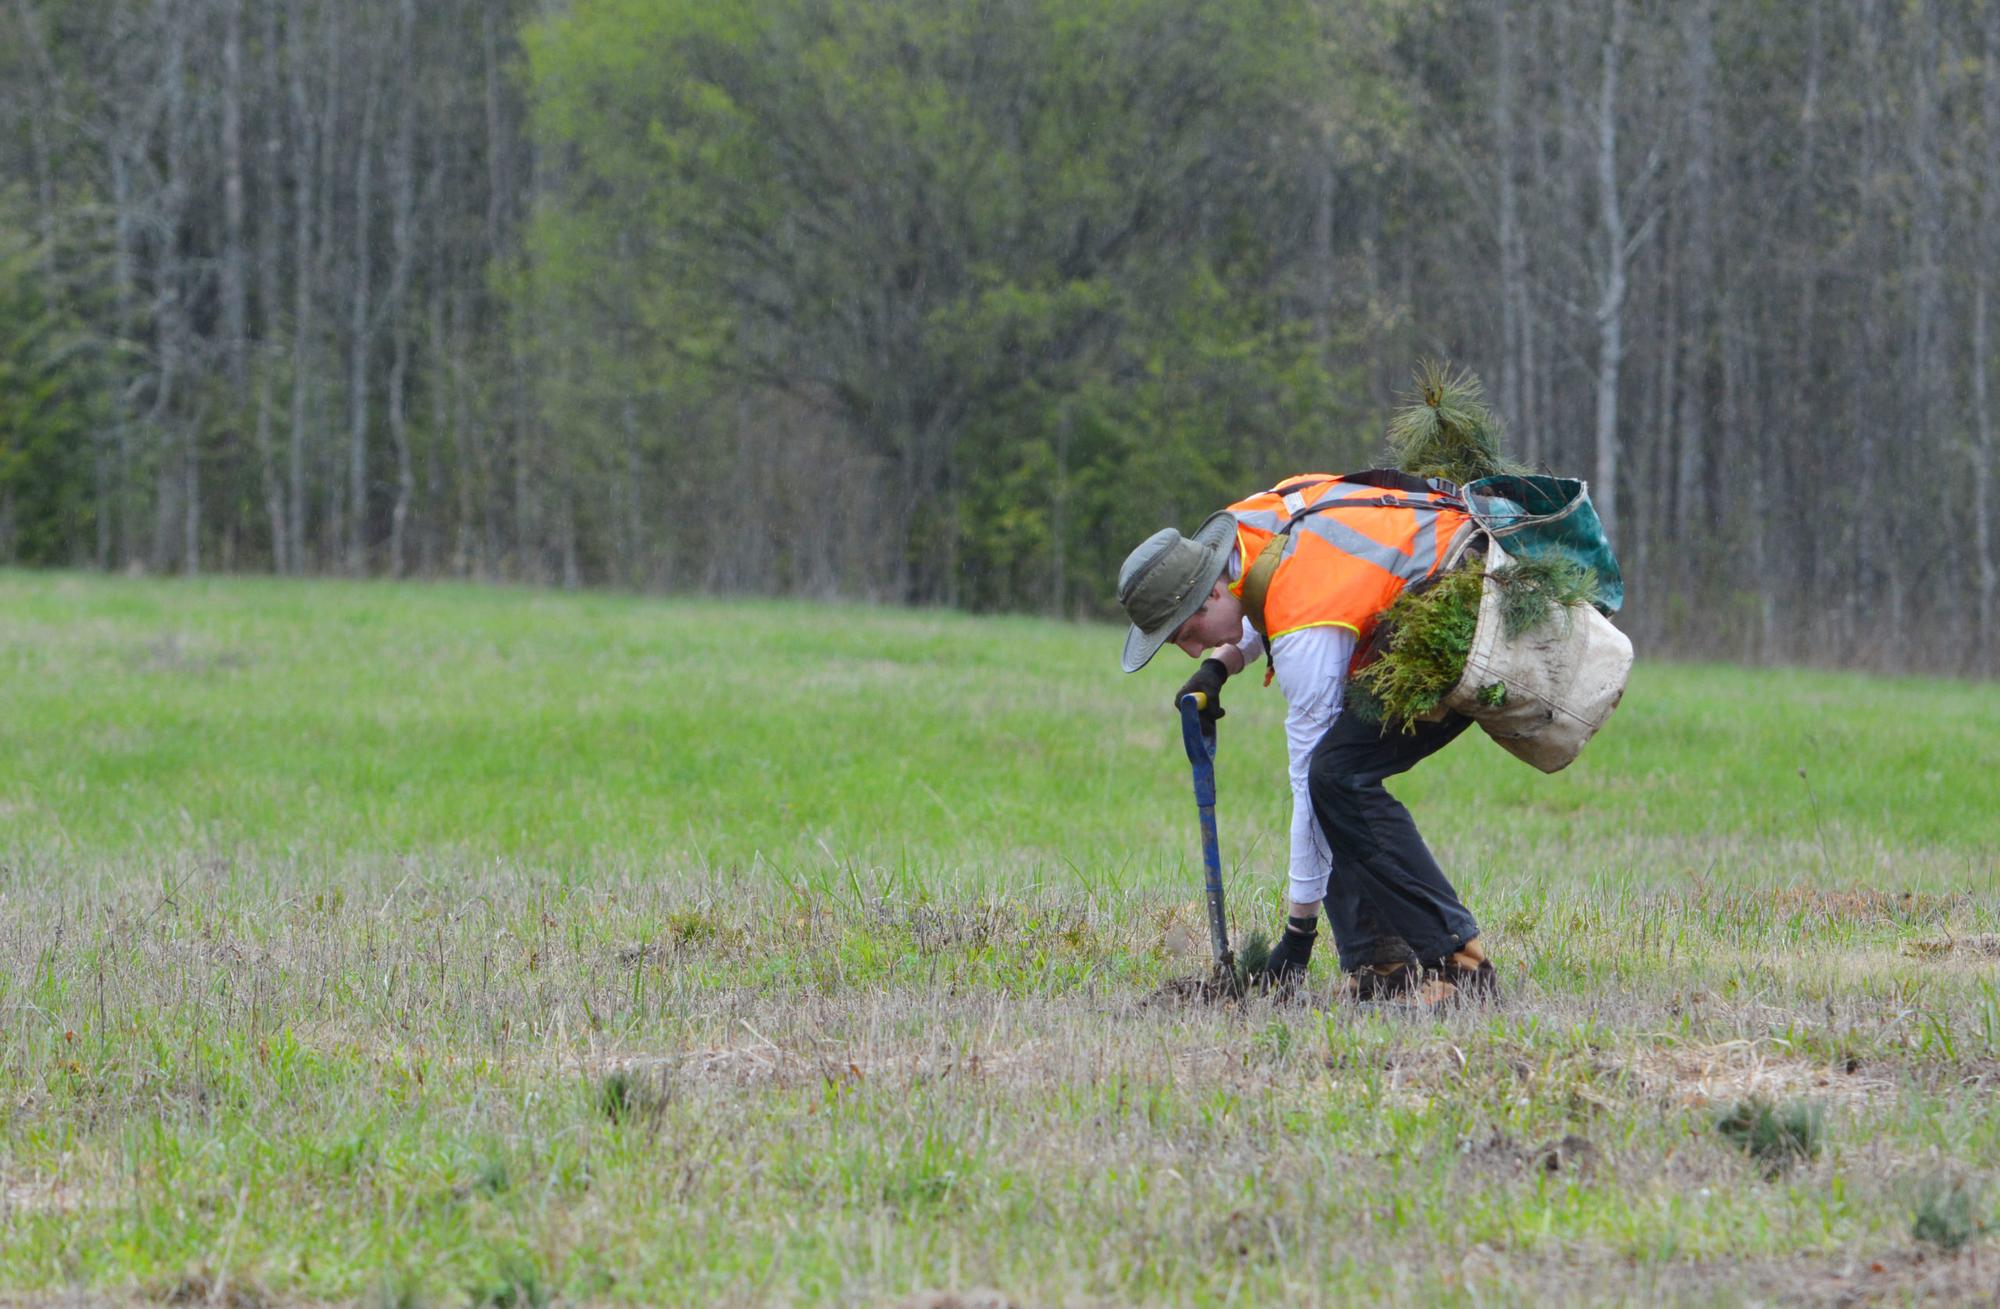 More than 65,000 trees to be planted in Prescott-Russell through Forests Ontario program